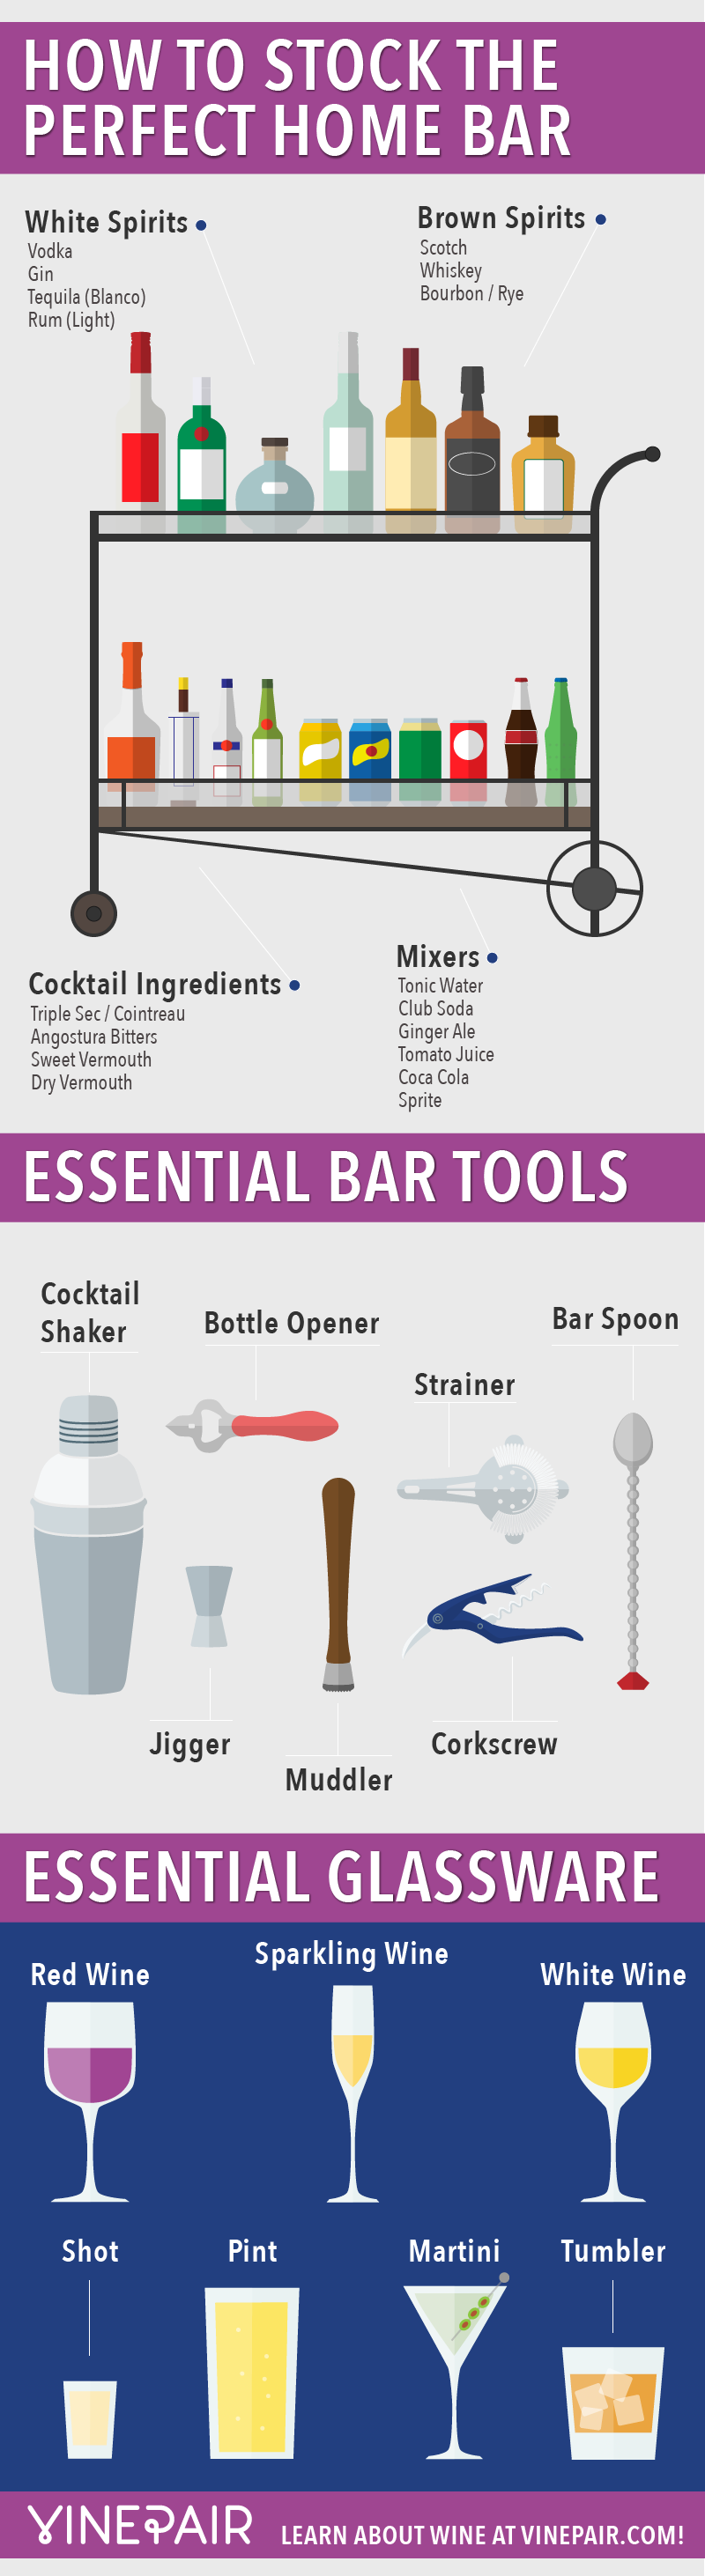 How To Stock The Perfect Home Bar INFOGRAPHIC VinePair